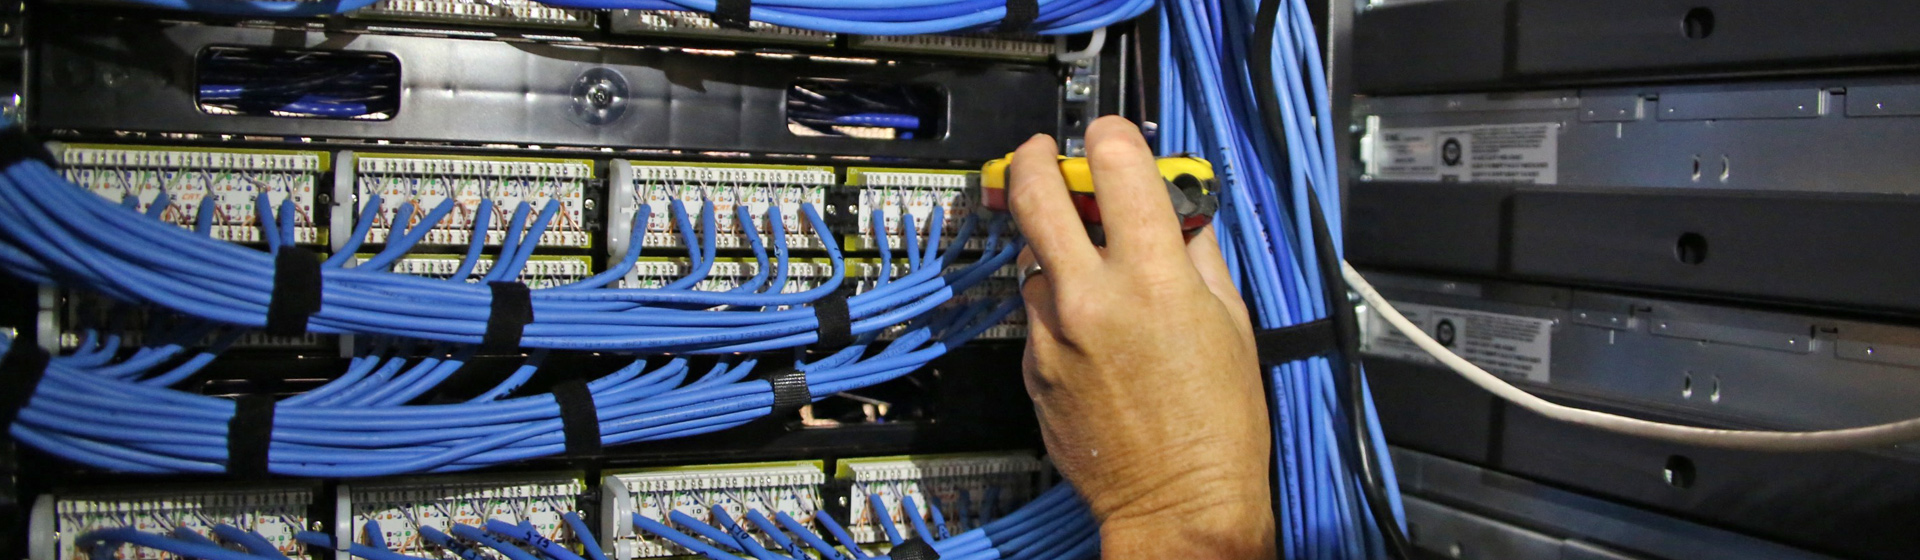 expert computer network cabling and wiring tampa fl 